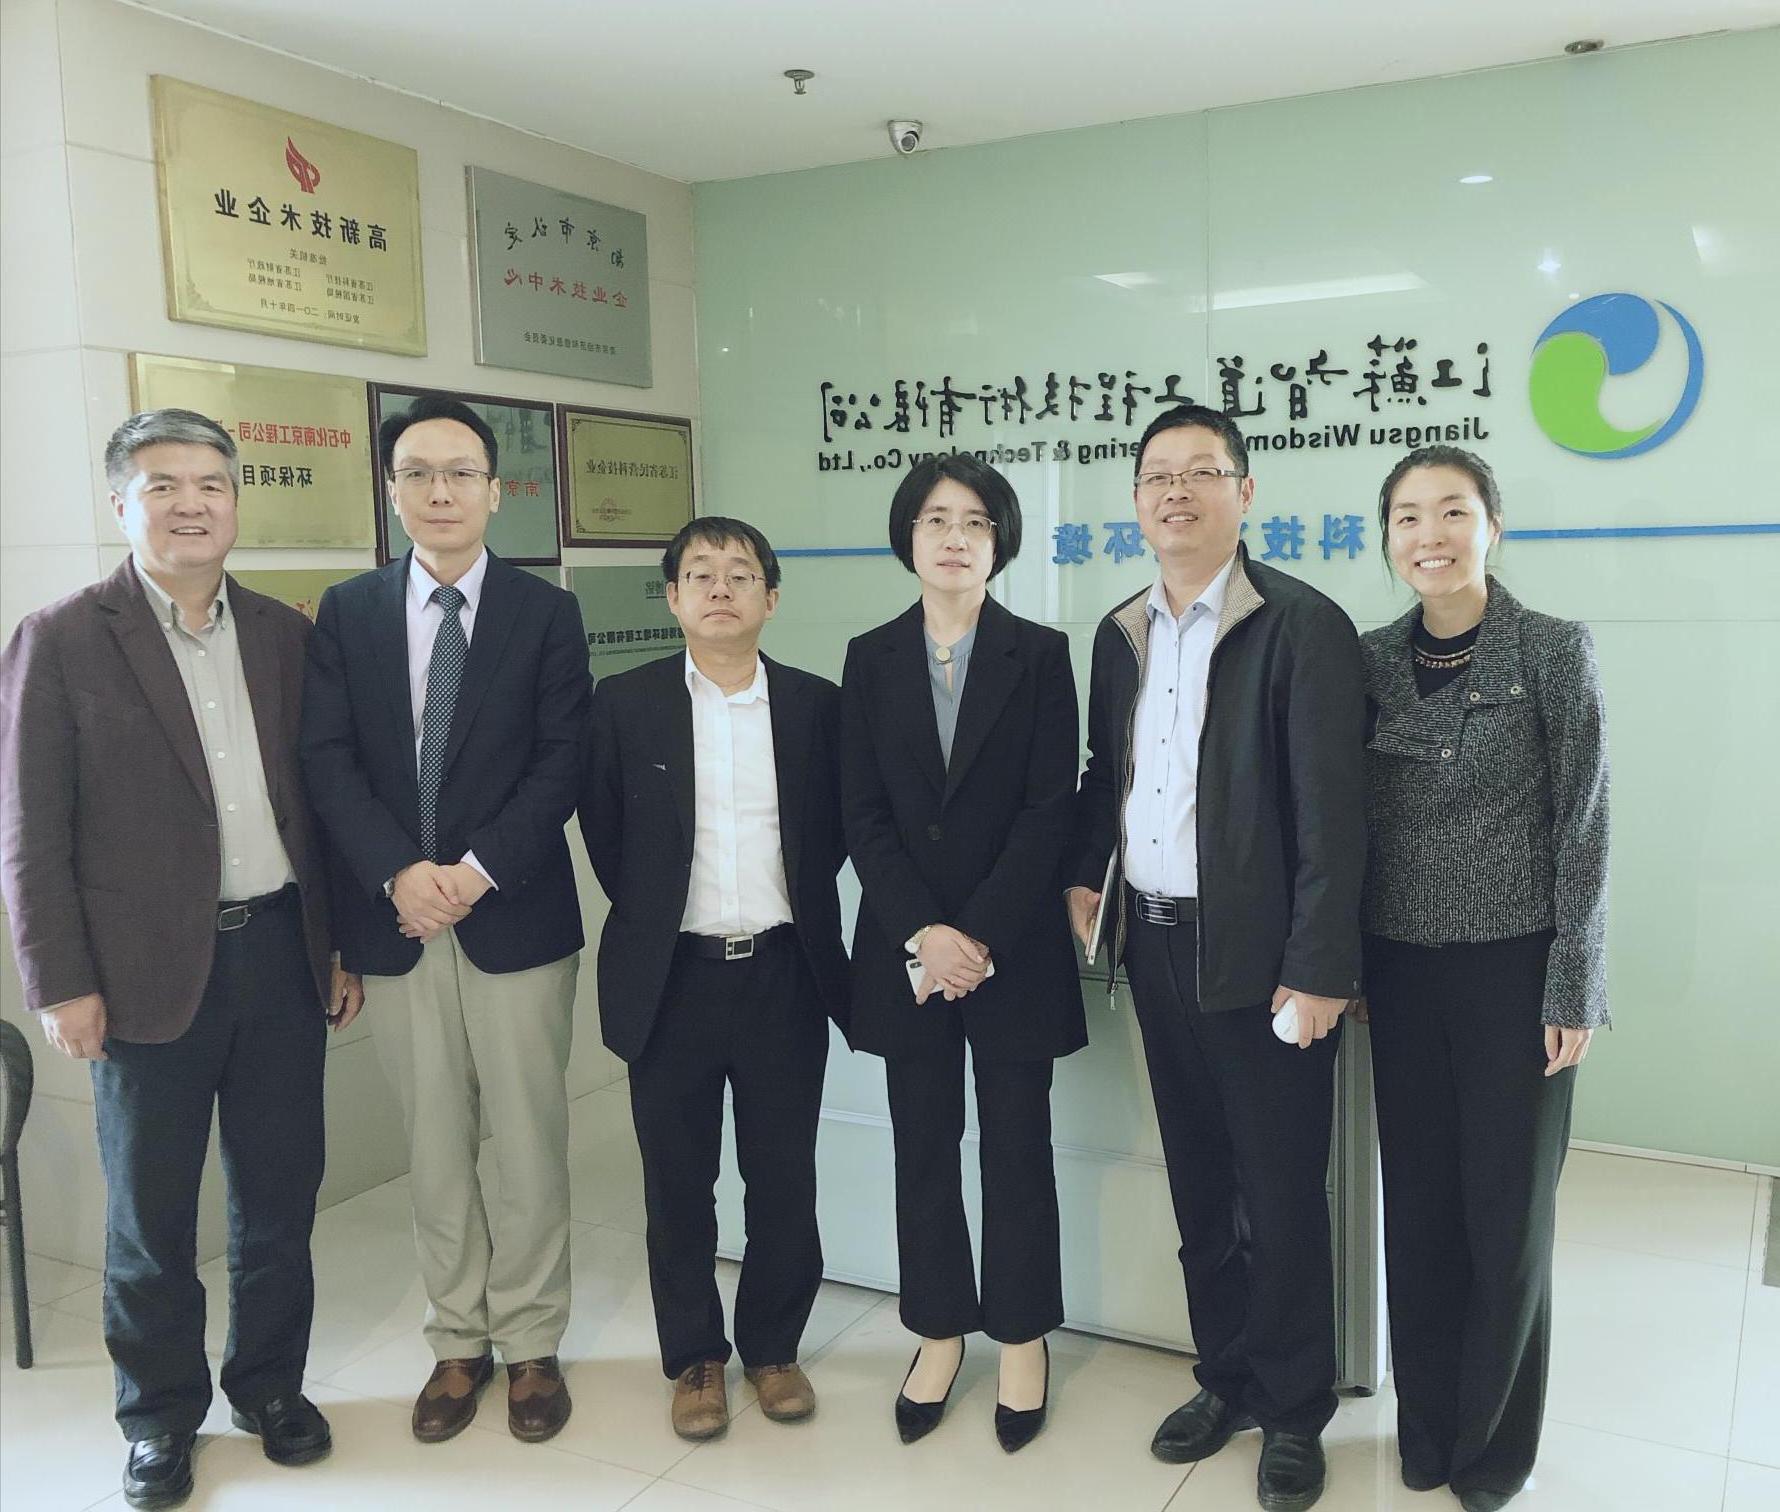 First from the right: Li Laisuo, CEO of Jiangsu Wisdom Engineering & Technology Co., Ltd. Second from the right: Wen Tao, General Manager of TSK Engineering China Co., Ltd. Third from the right: Tatsuya Mameda, Senior Engineer of TSK Engineering China Co.